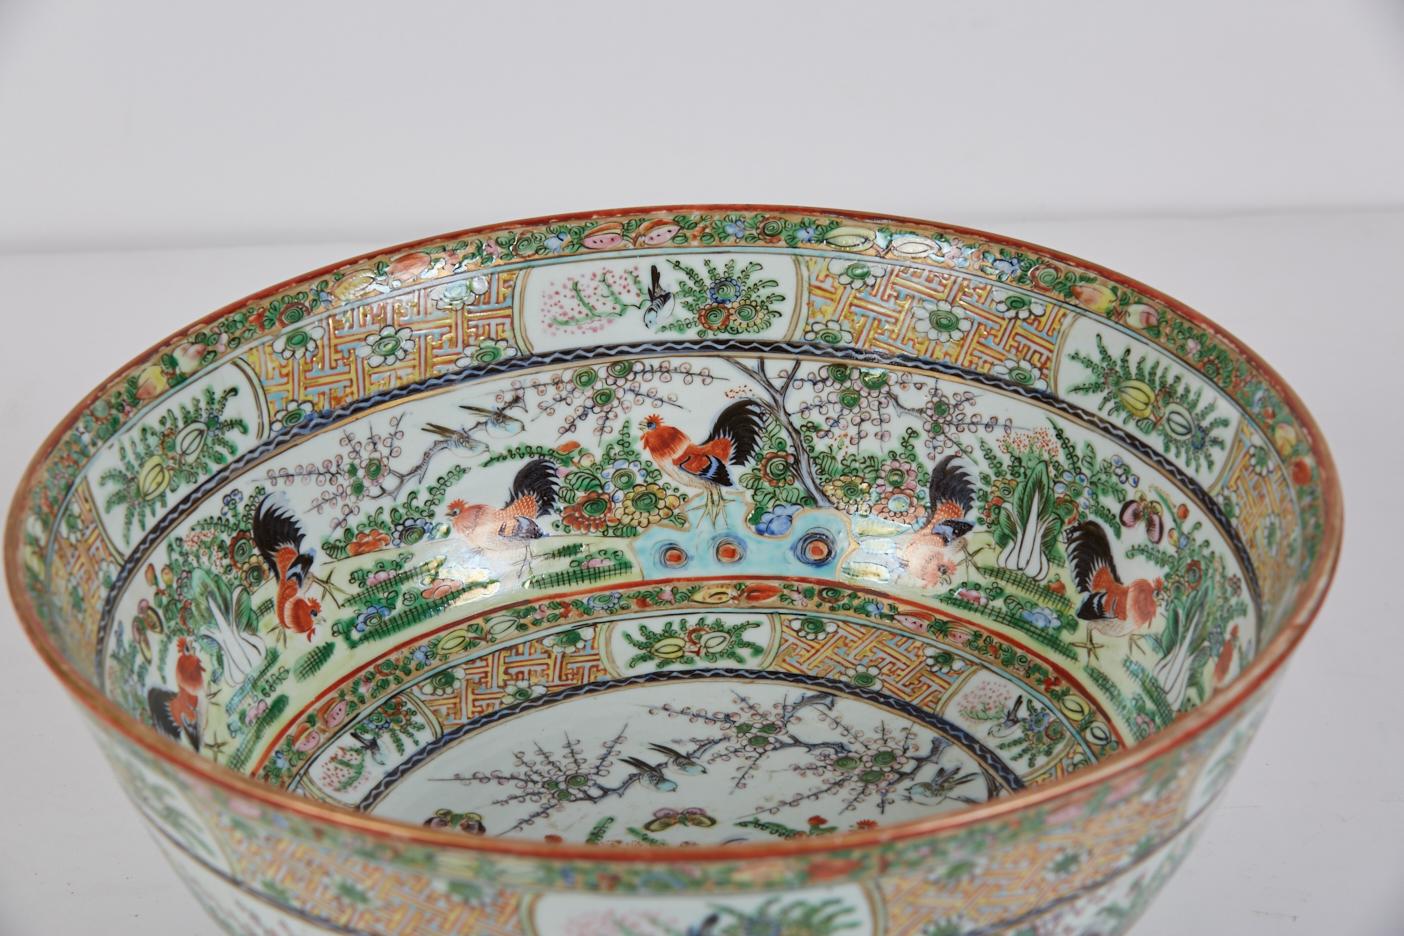 A large 19th century famille verte Chinese export porcelain punch bowl with banded polychrome decoration of roosters in a landscape reflected on the interior and exterior of the bowl. Narrow bands of fruit and foliage motifs, some on a gilt